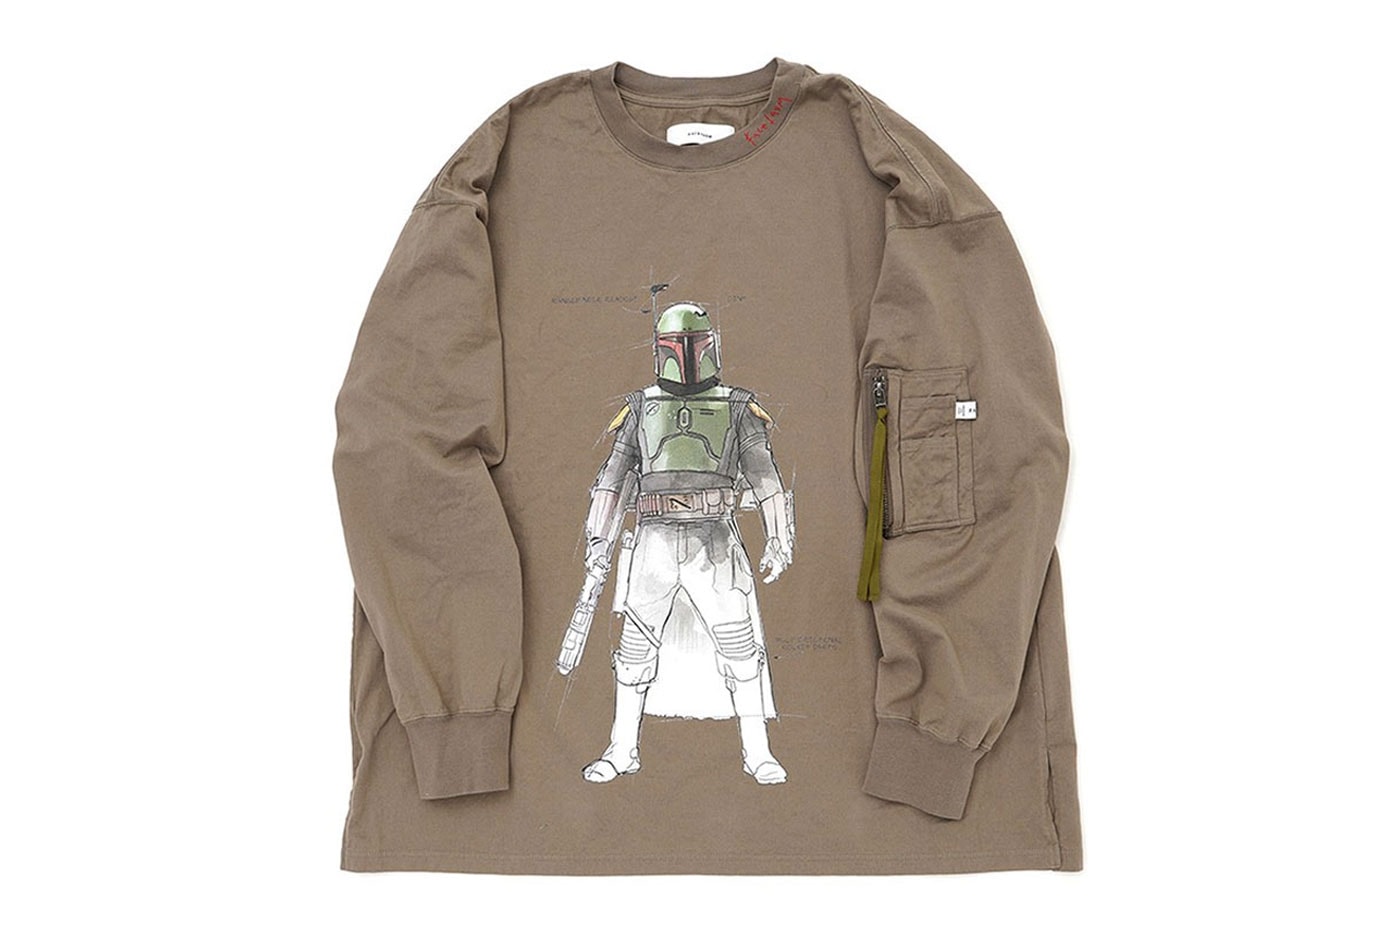 FACETASM and Disney Join Forces To Bring Characters Mickey Mouse and Boba Fett to Life in New Capsule collection hiroshi ochiai star wars the book of boba fett shibuya baby yoda 